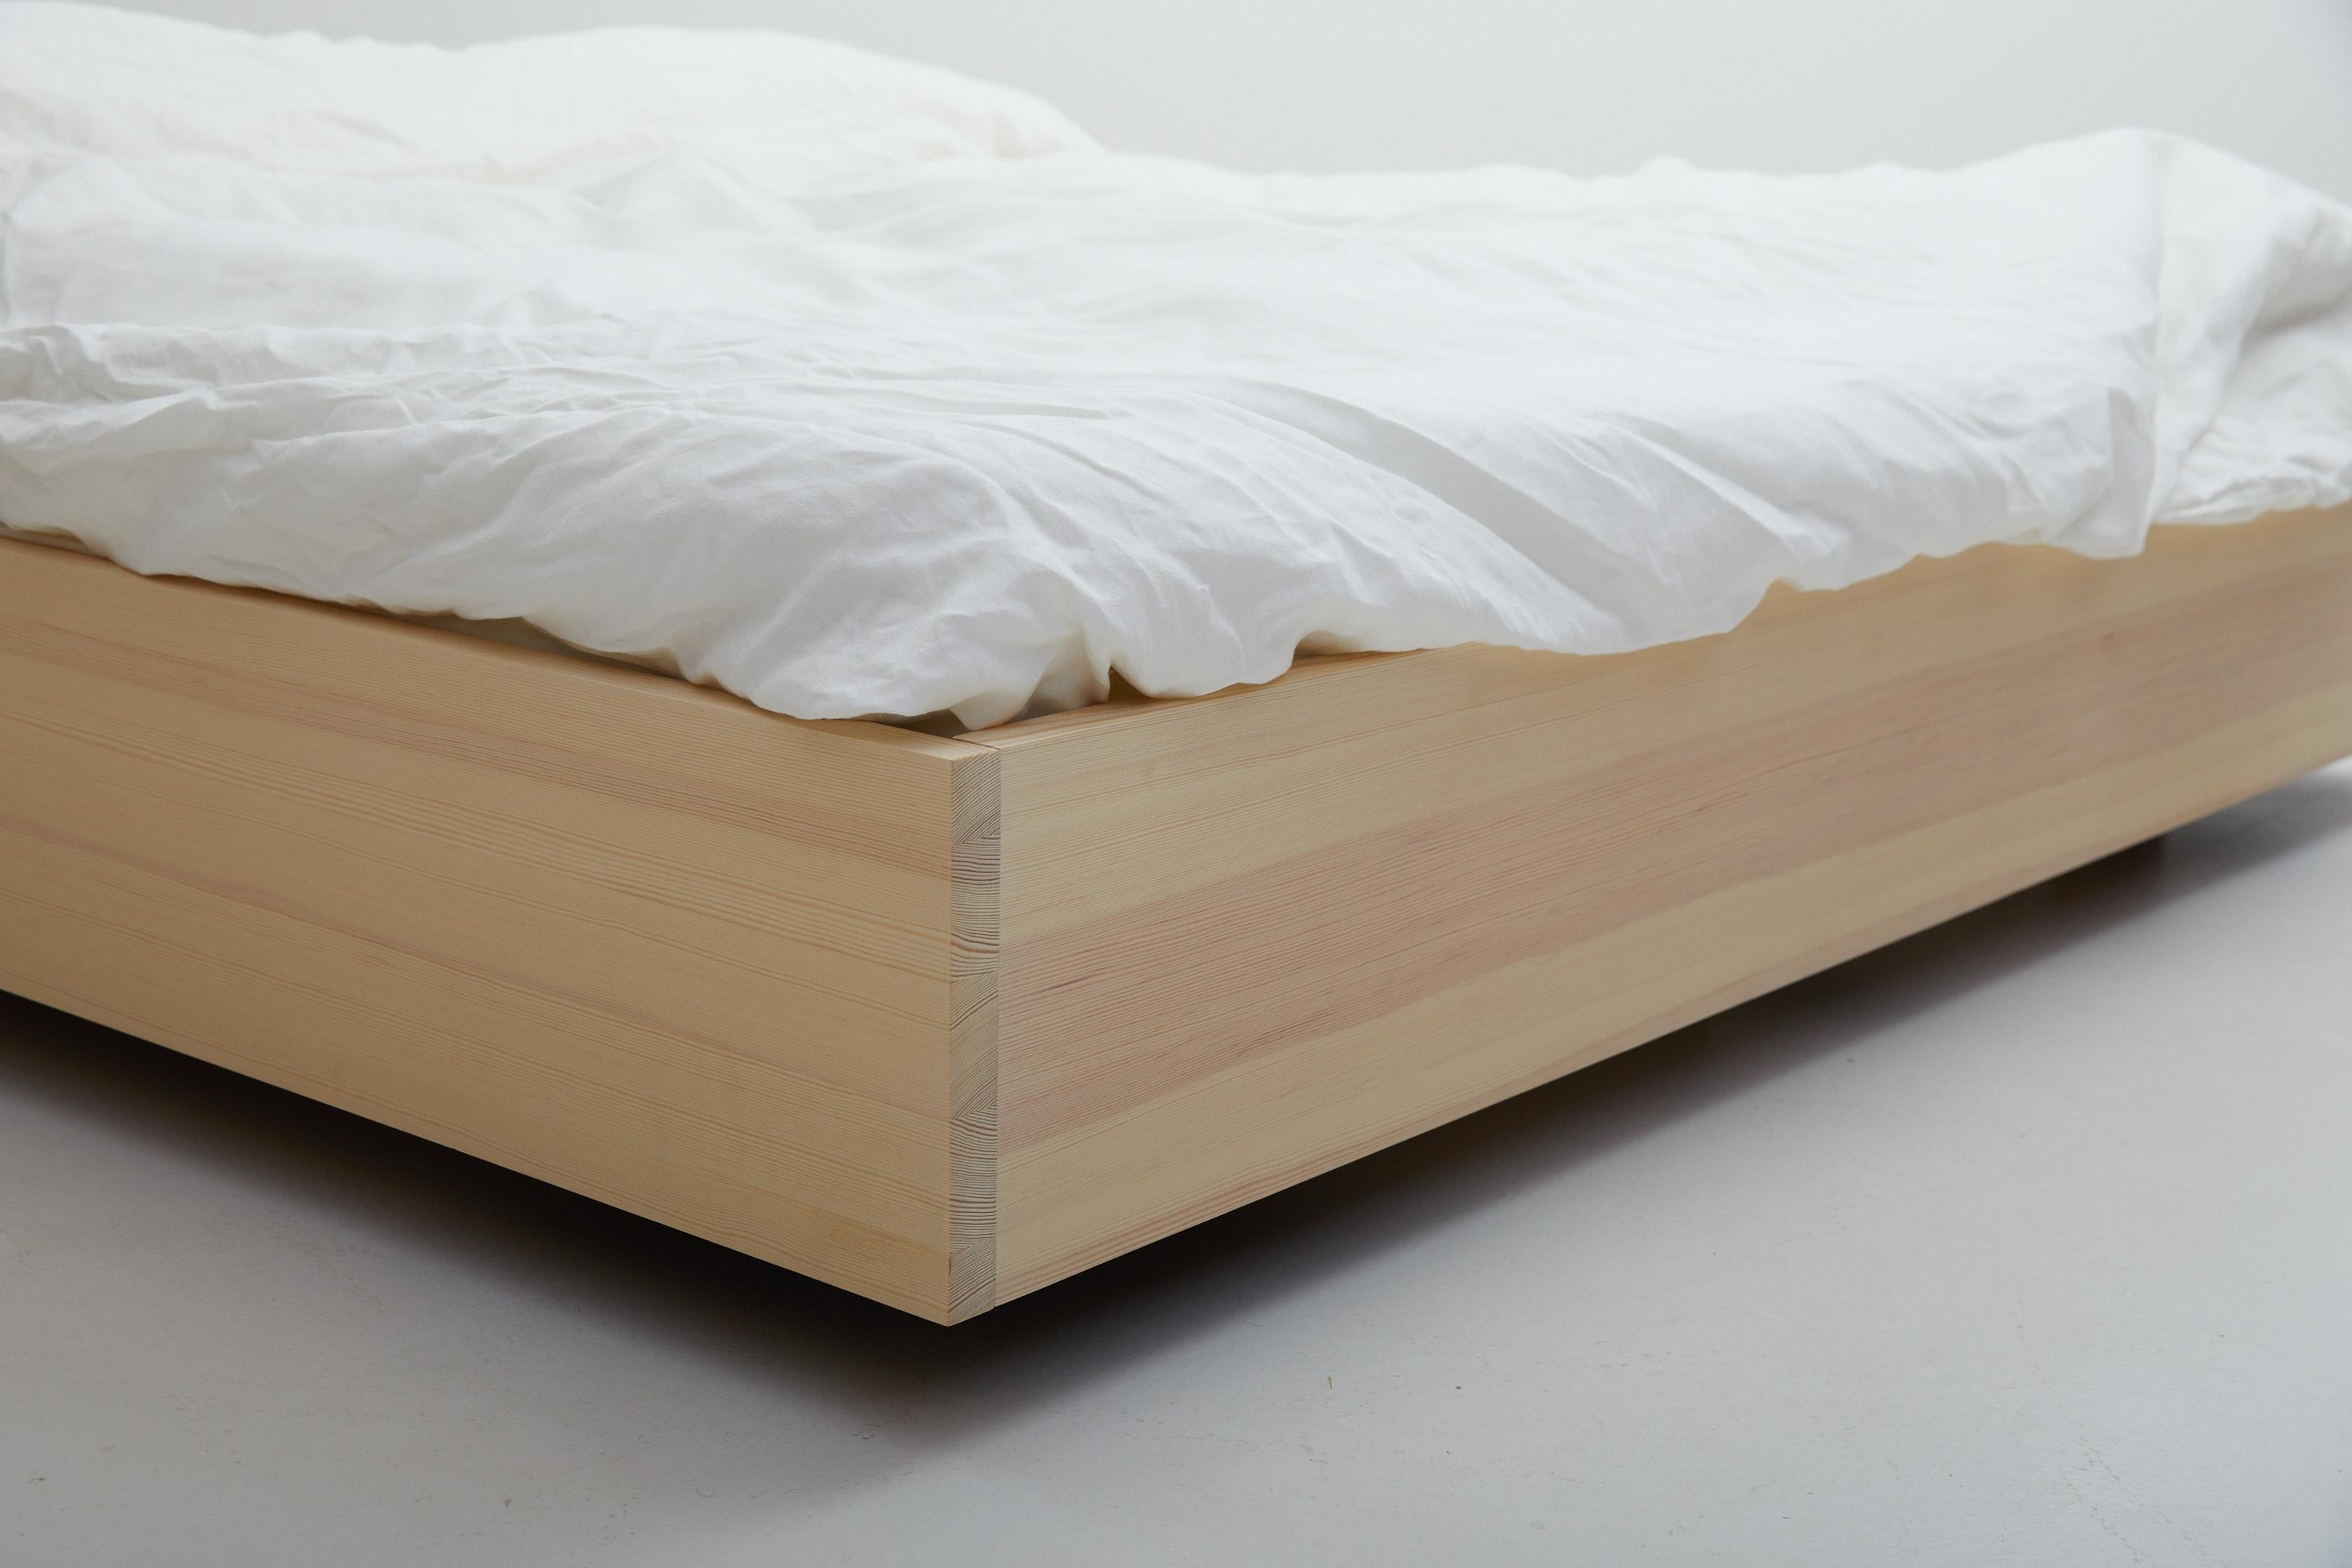 The Floating Bed

A sense of hovering freely inspired cabinet maker Axel Wannberg to design The Floating Bed – a distinct bedroom piece in massive Swedish Pine.

Pine wood is a beautiful and versatile material that can add warmth and character to